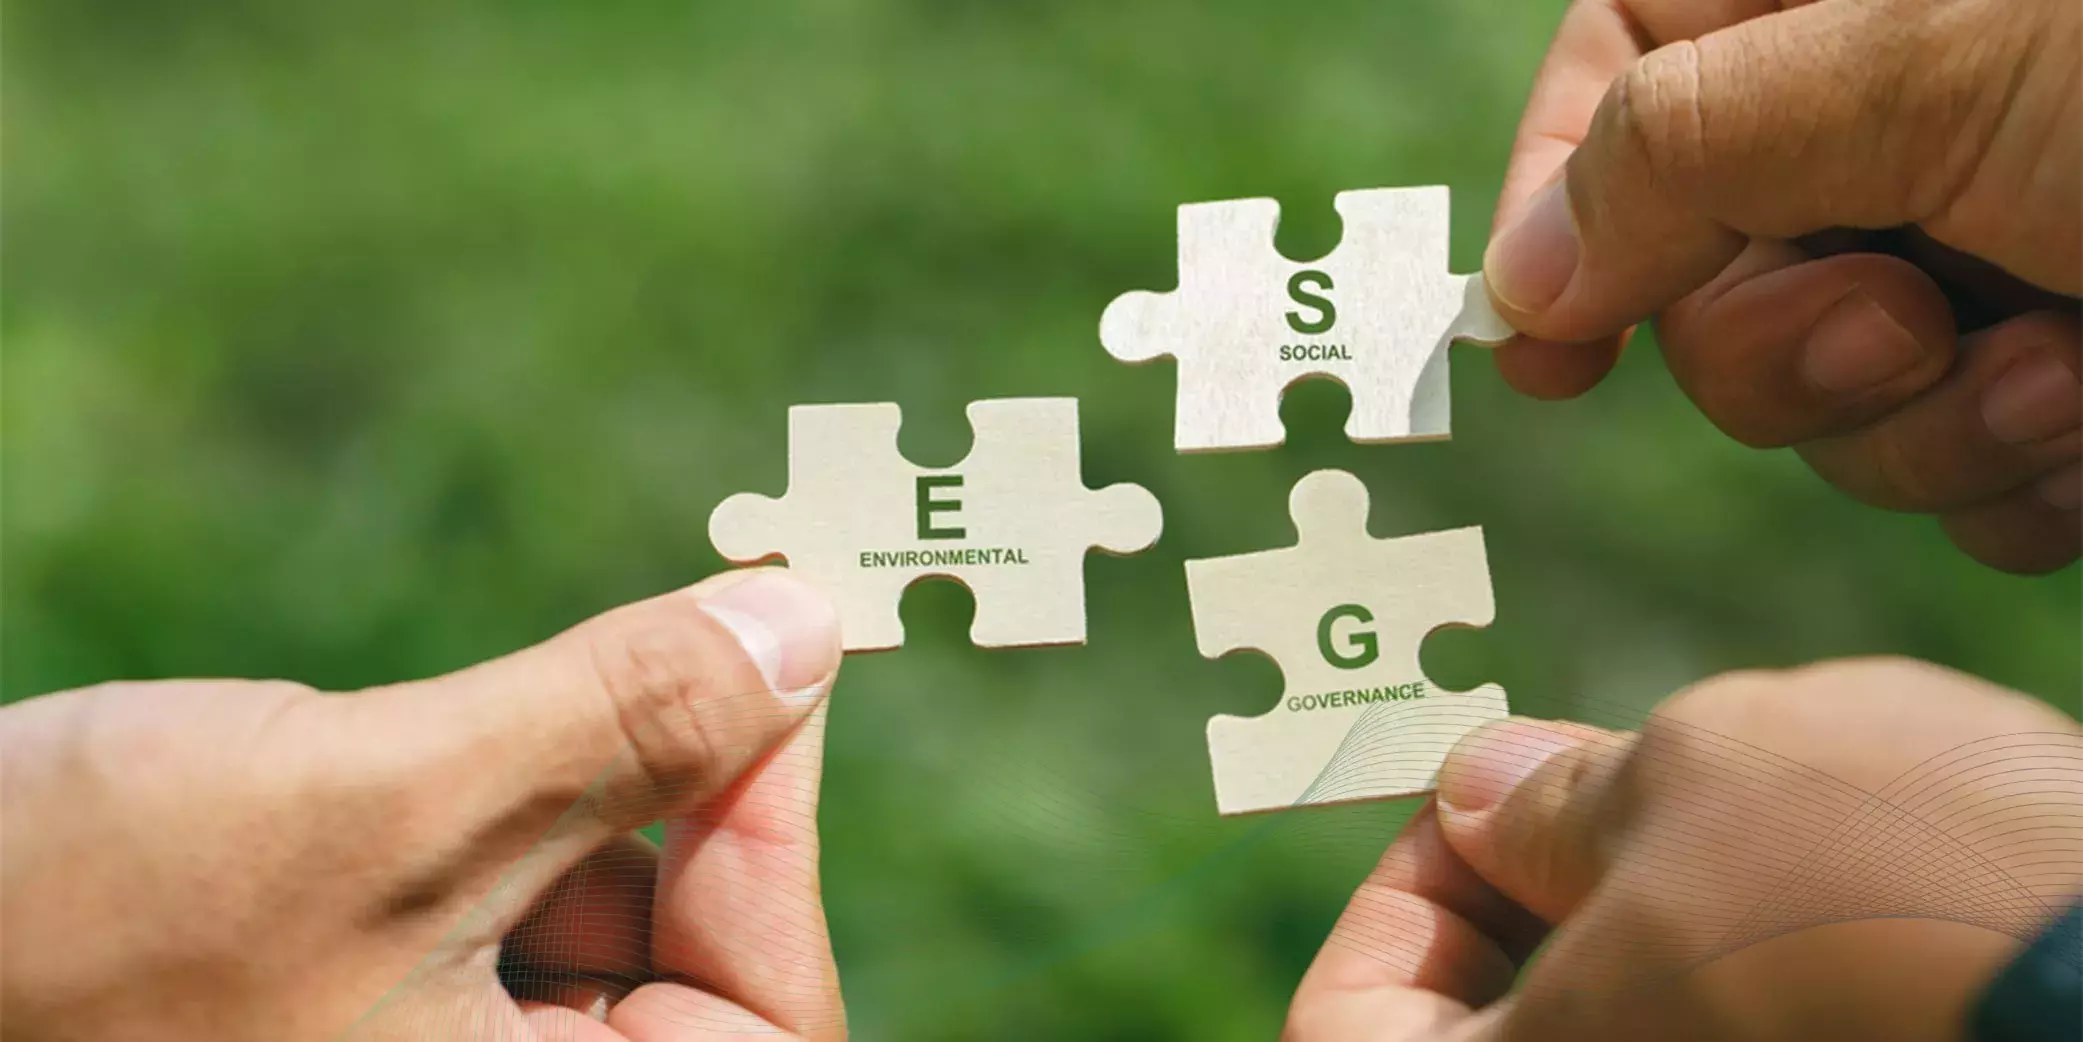 Why Should Finance Take the Lead on ESG Strategy?